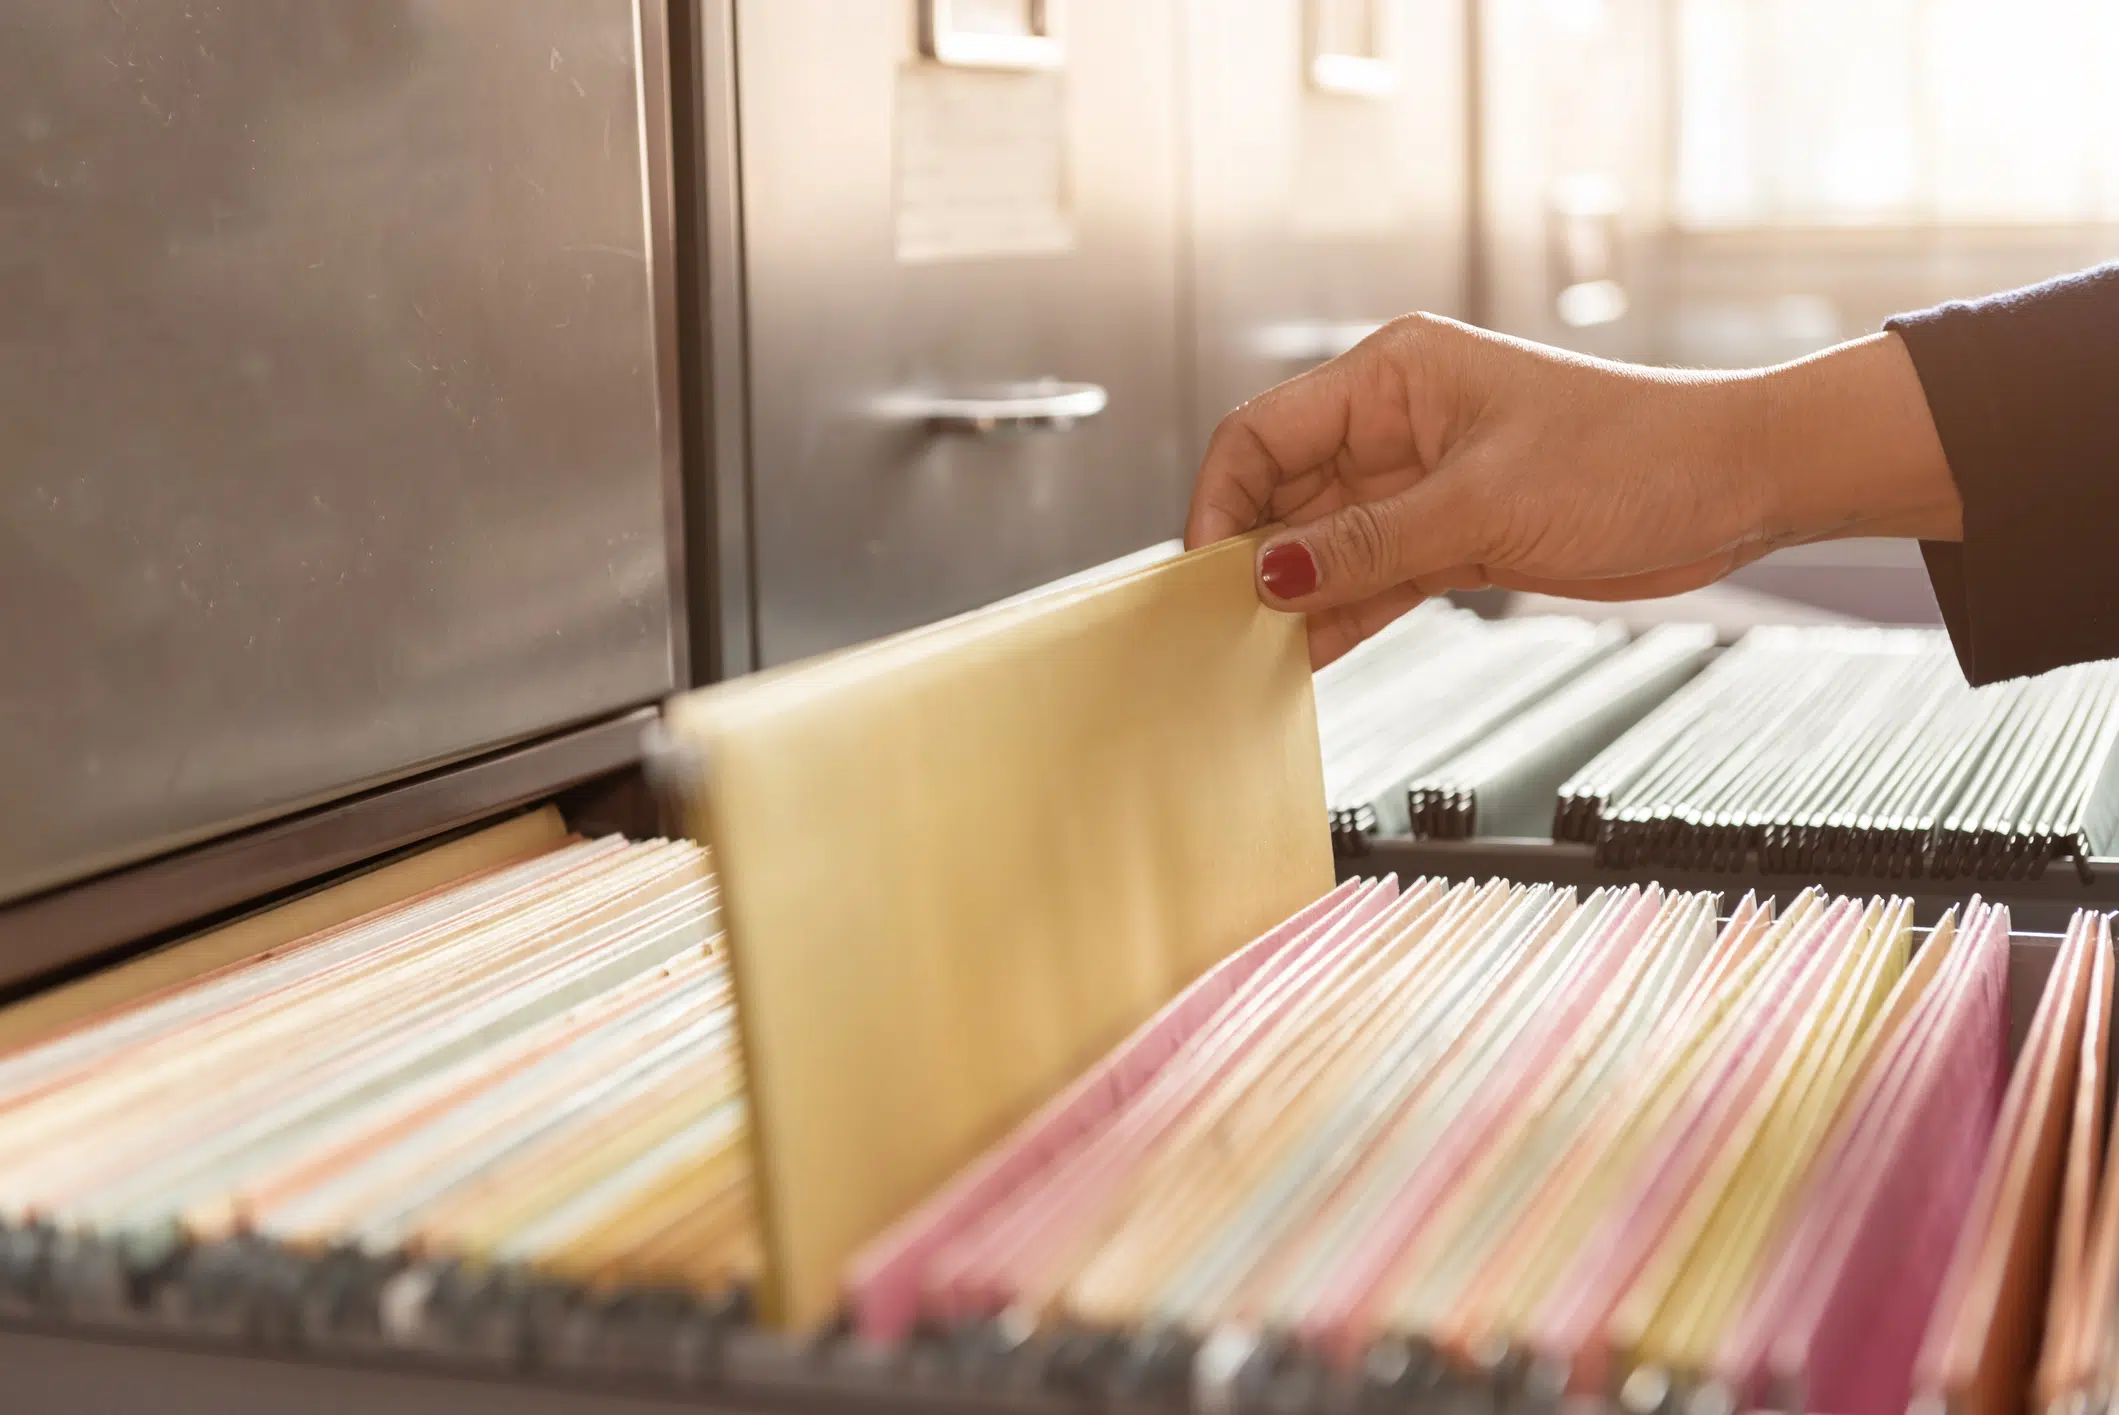 Employment Records Retention: What Are the Federal Laws?